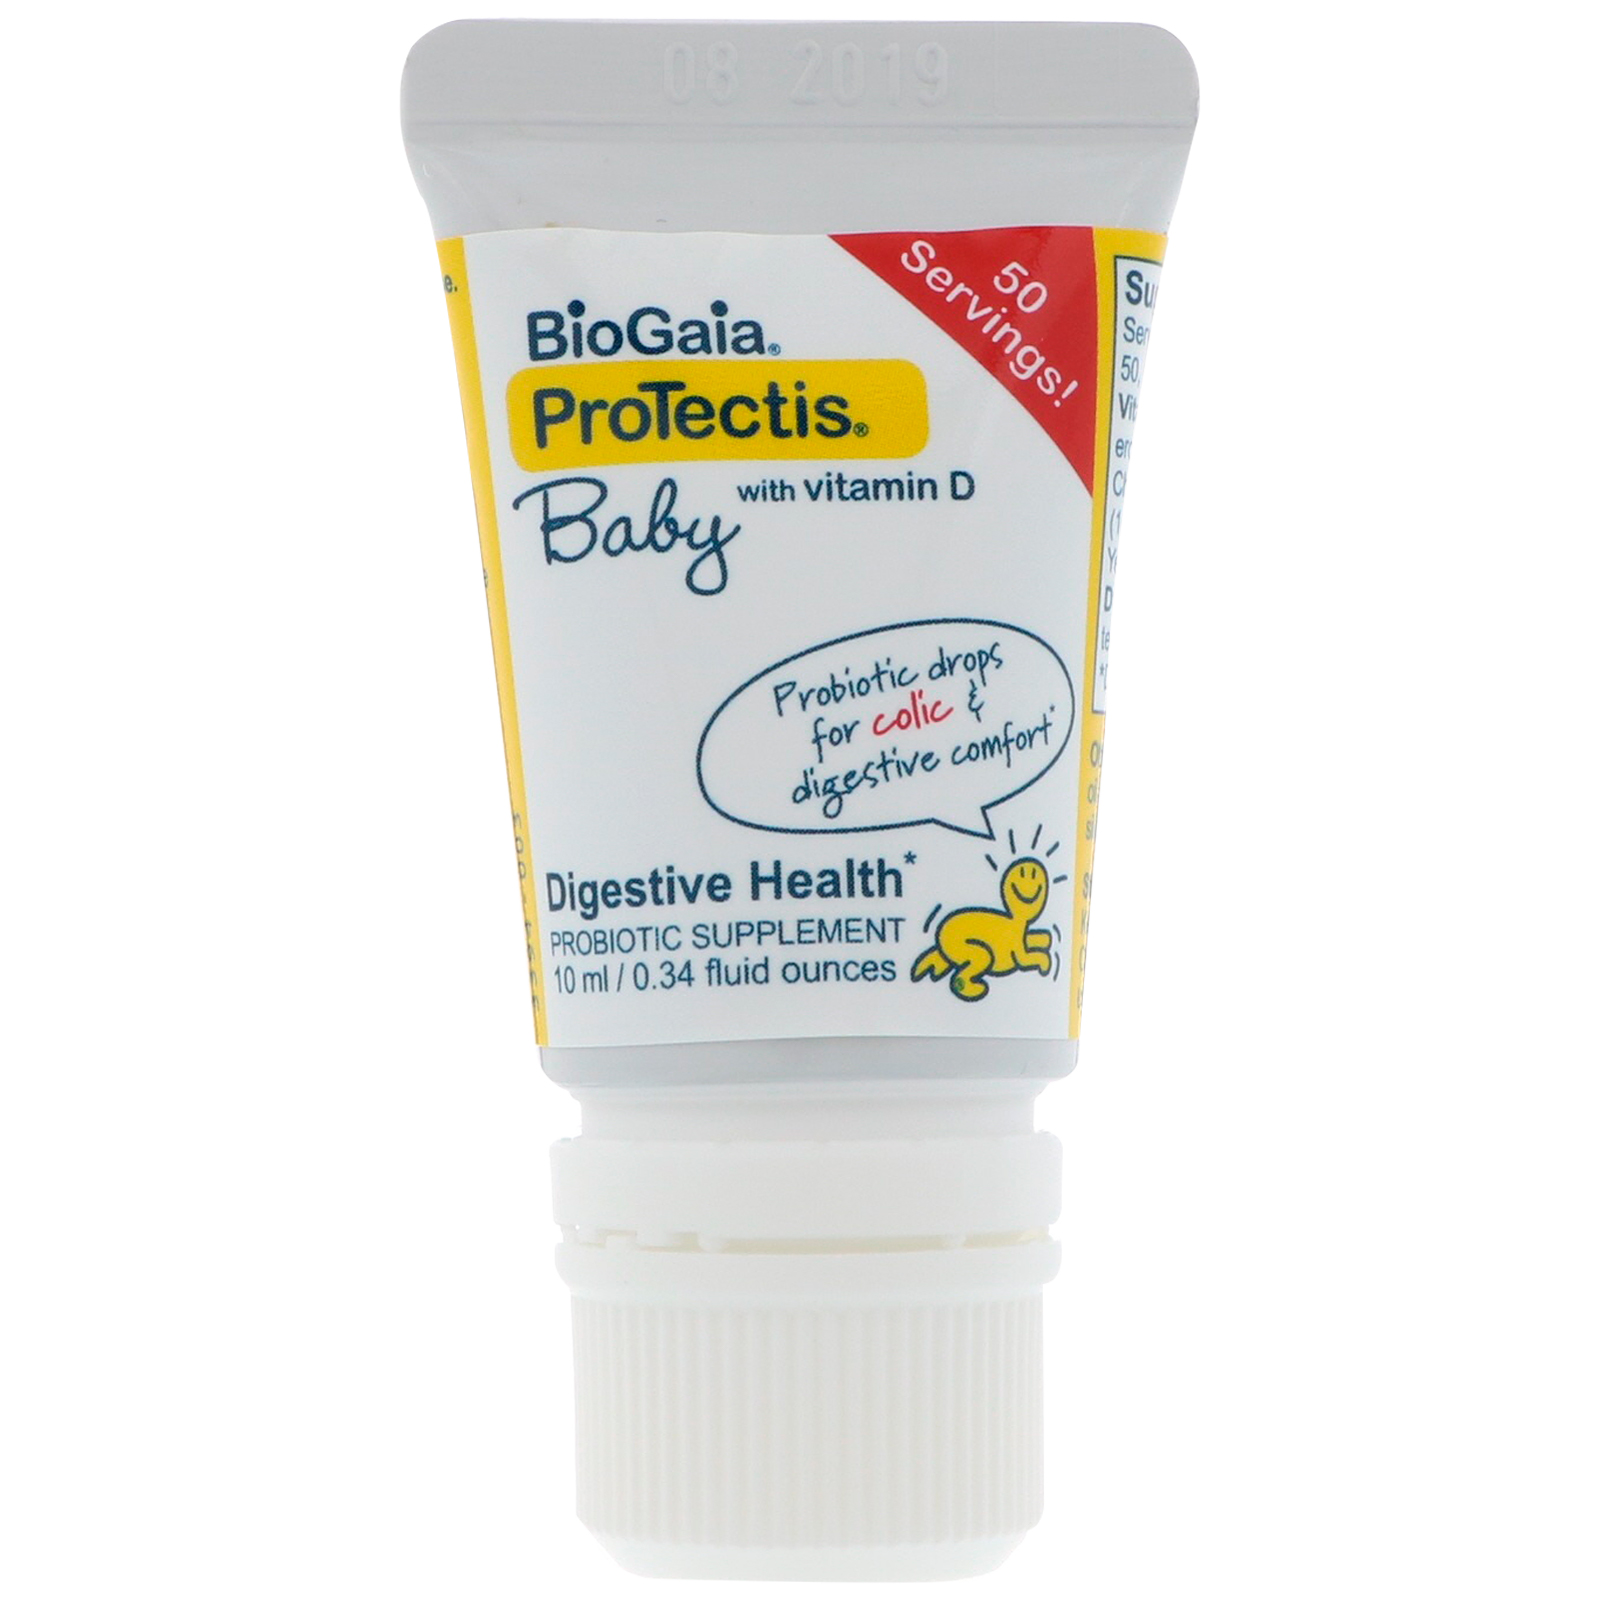 Biogaia Protectis Baby With Vitamin D Digestive Health